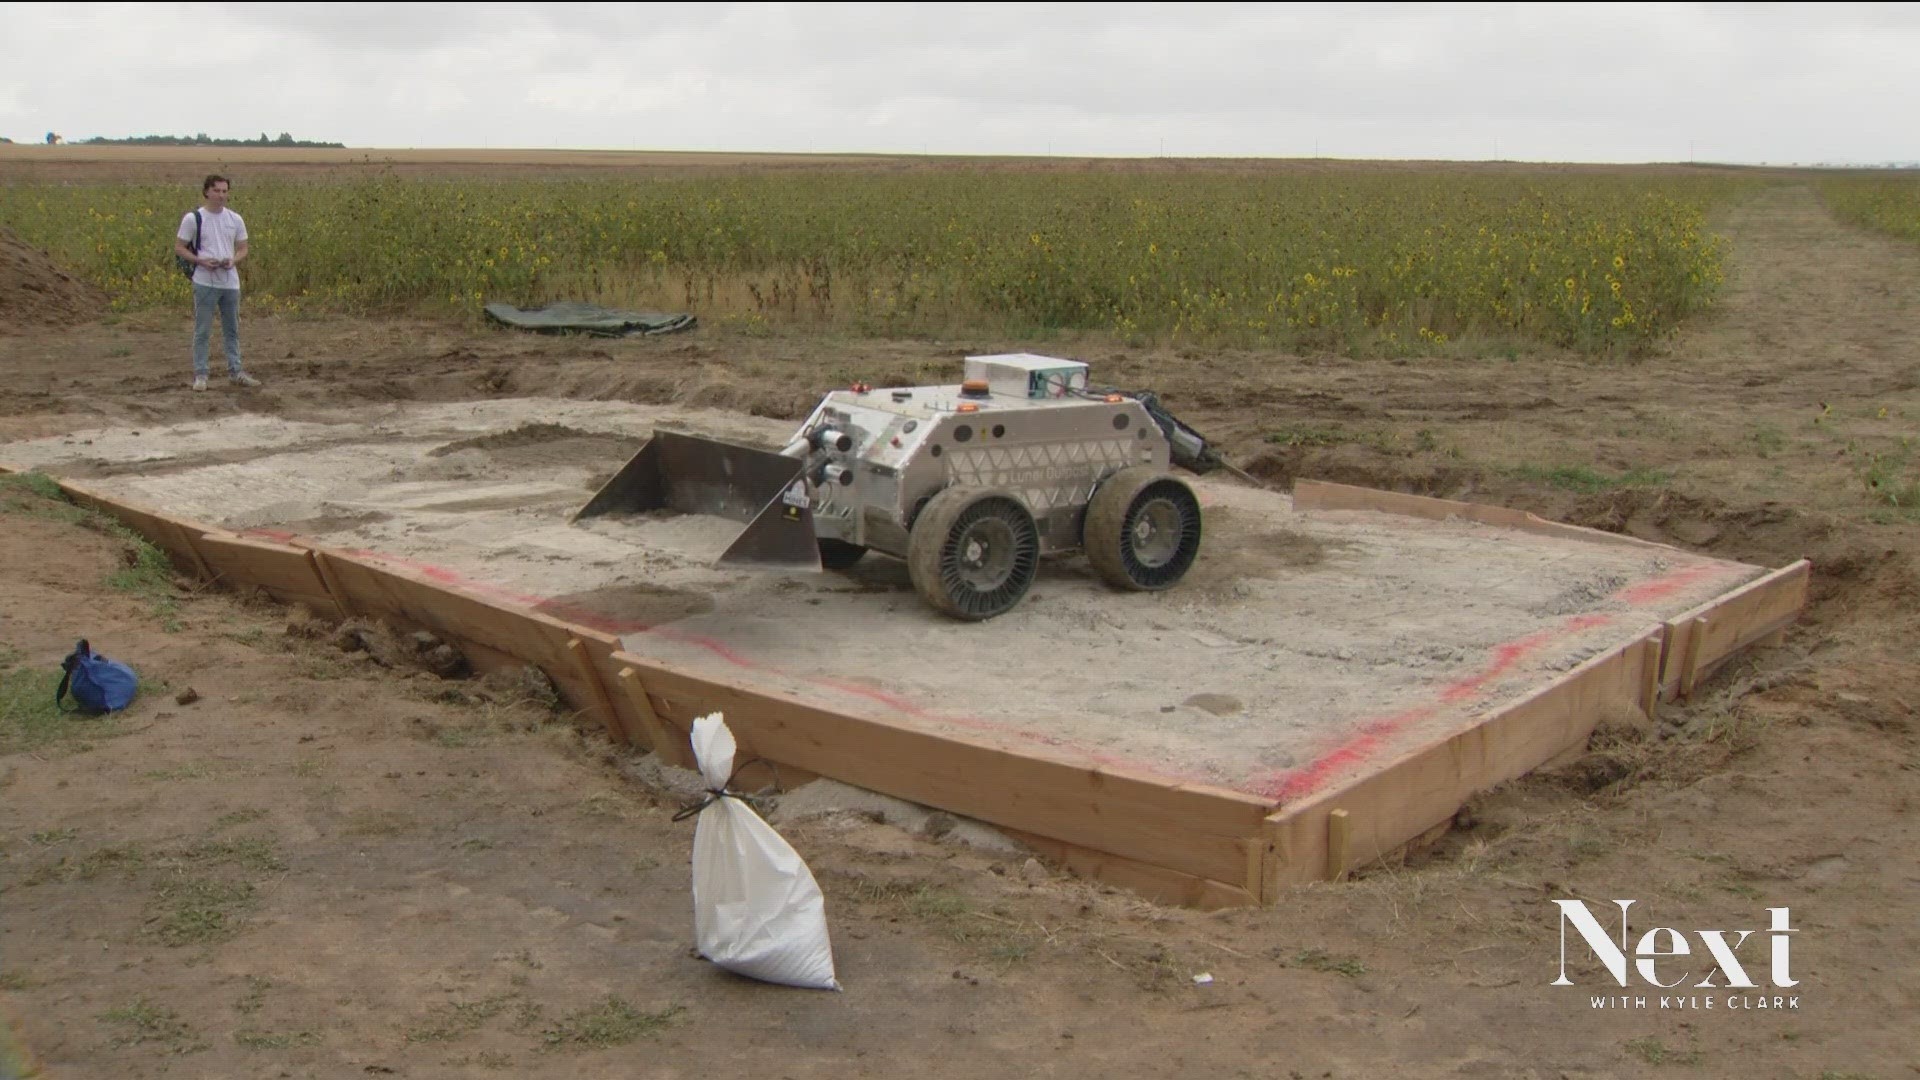 The Mines team partnered with a local aerospace company to compete for $1.5 million in funding from NASA that they would use to continue development of the rover.